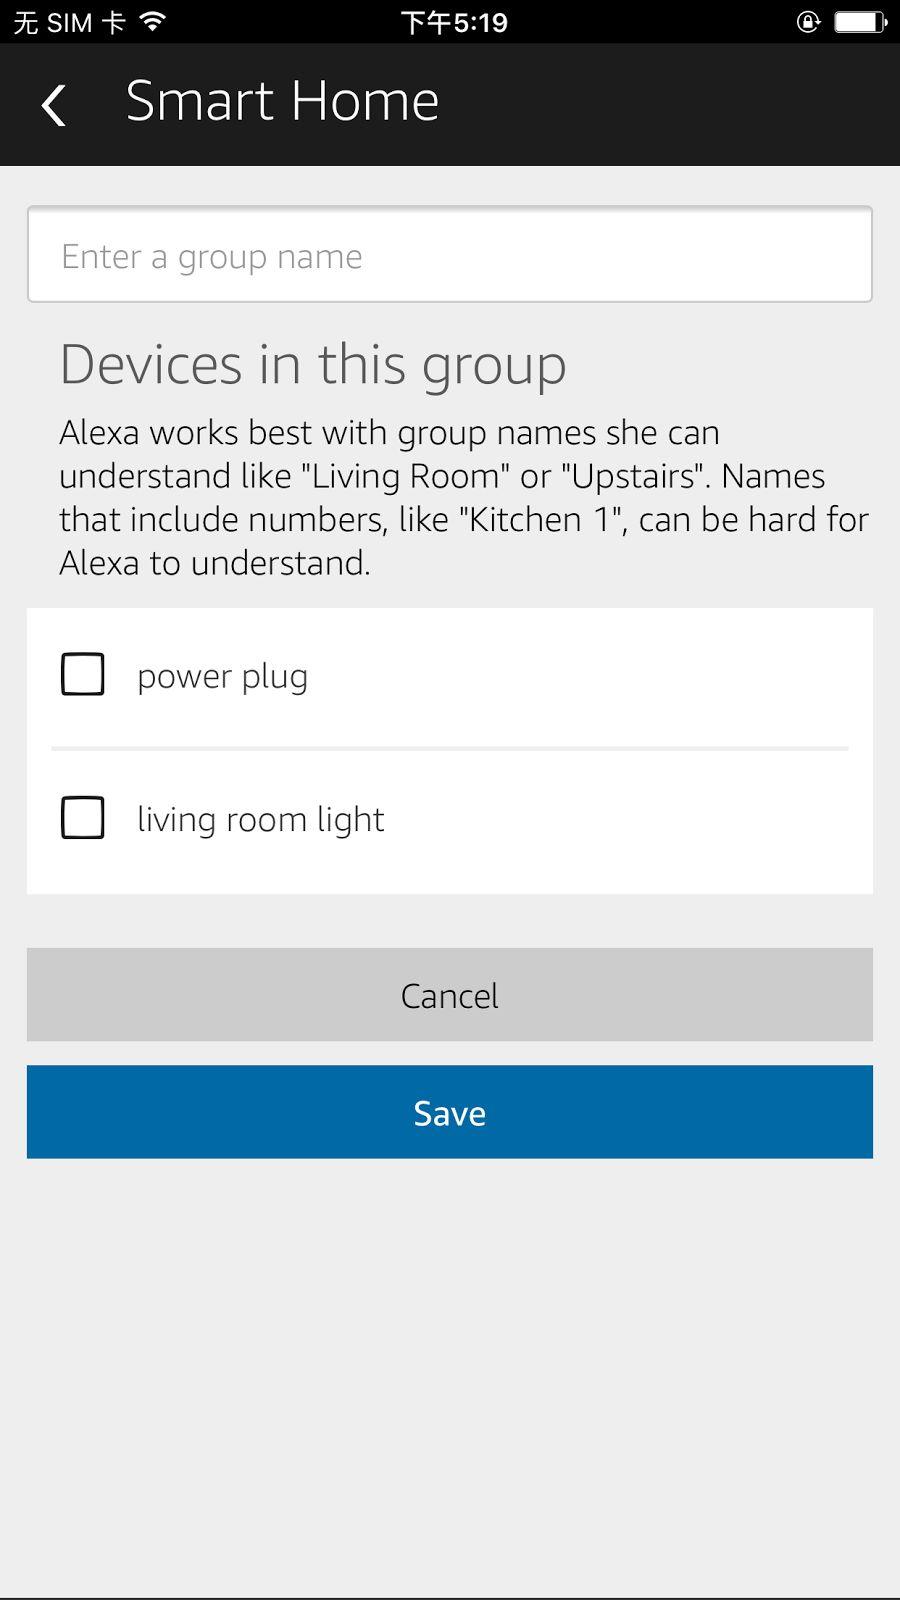 3. Using Alexa Smart Home Group In Amazon Alexa app, under Smart Home page, user can create groups to control multiple devices at a time.